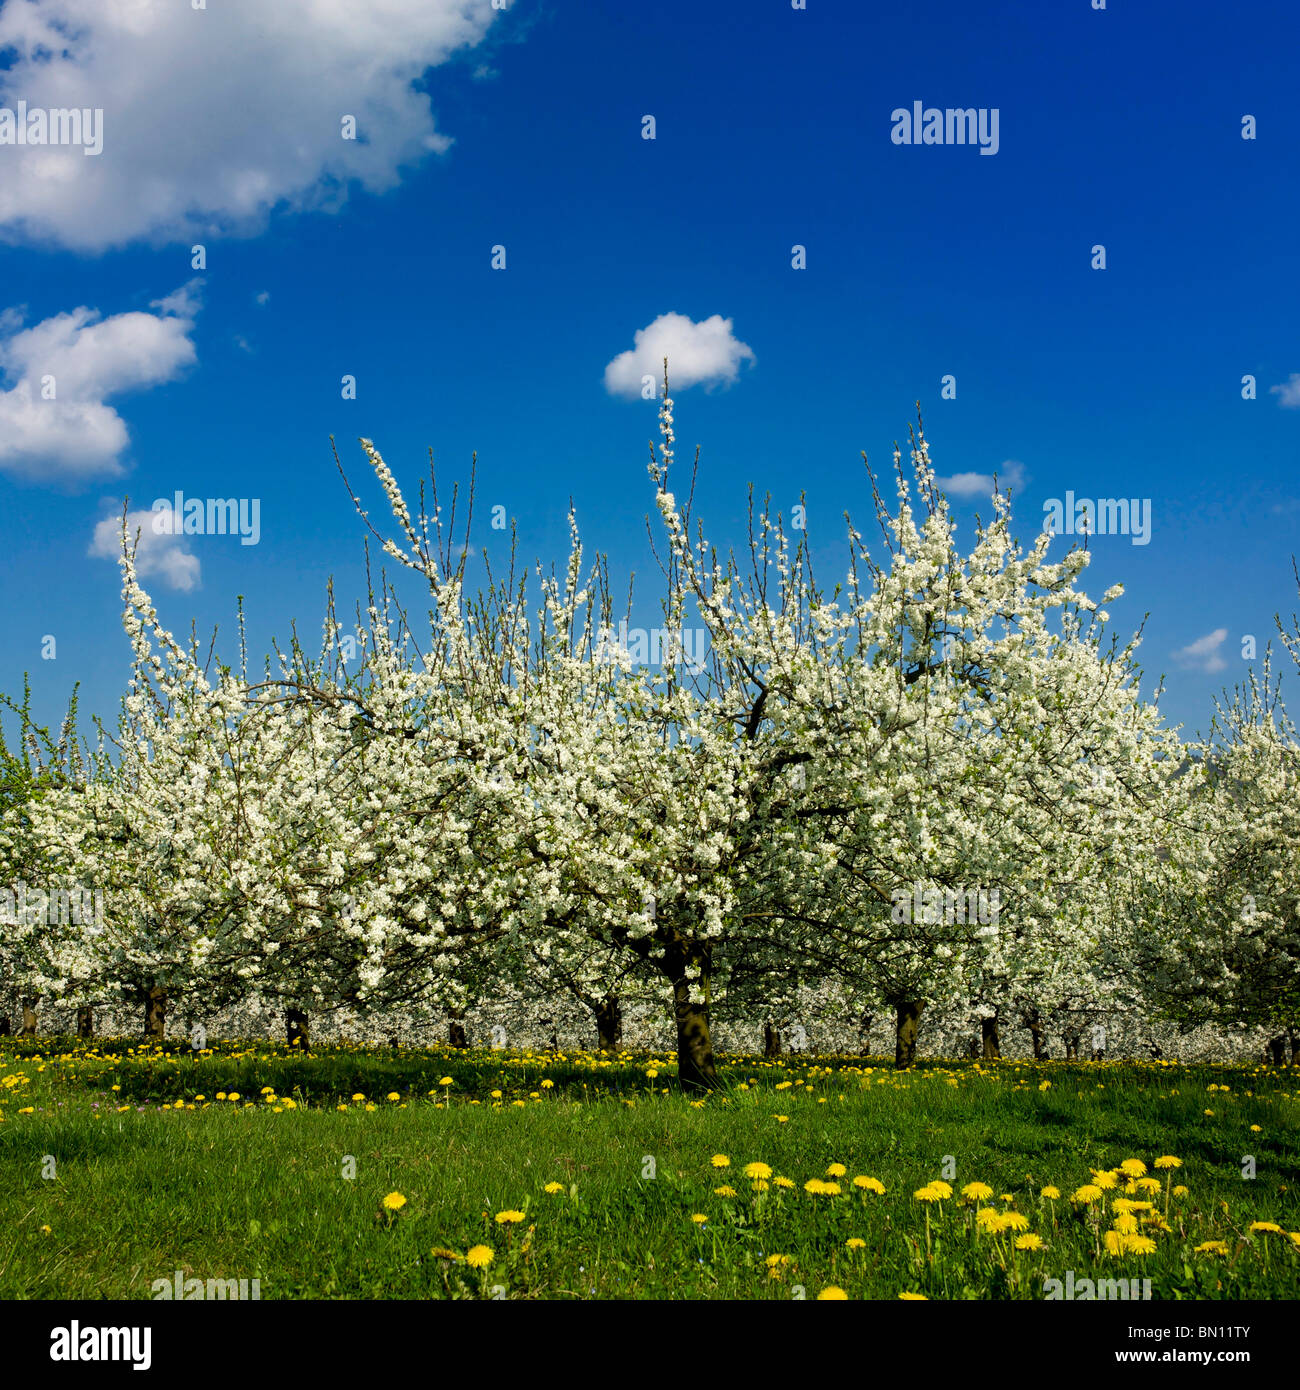 Apple trees (Malus domestica) in an orchard, Limagne, Auvergne, France, Europe Stock Photo